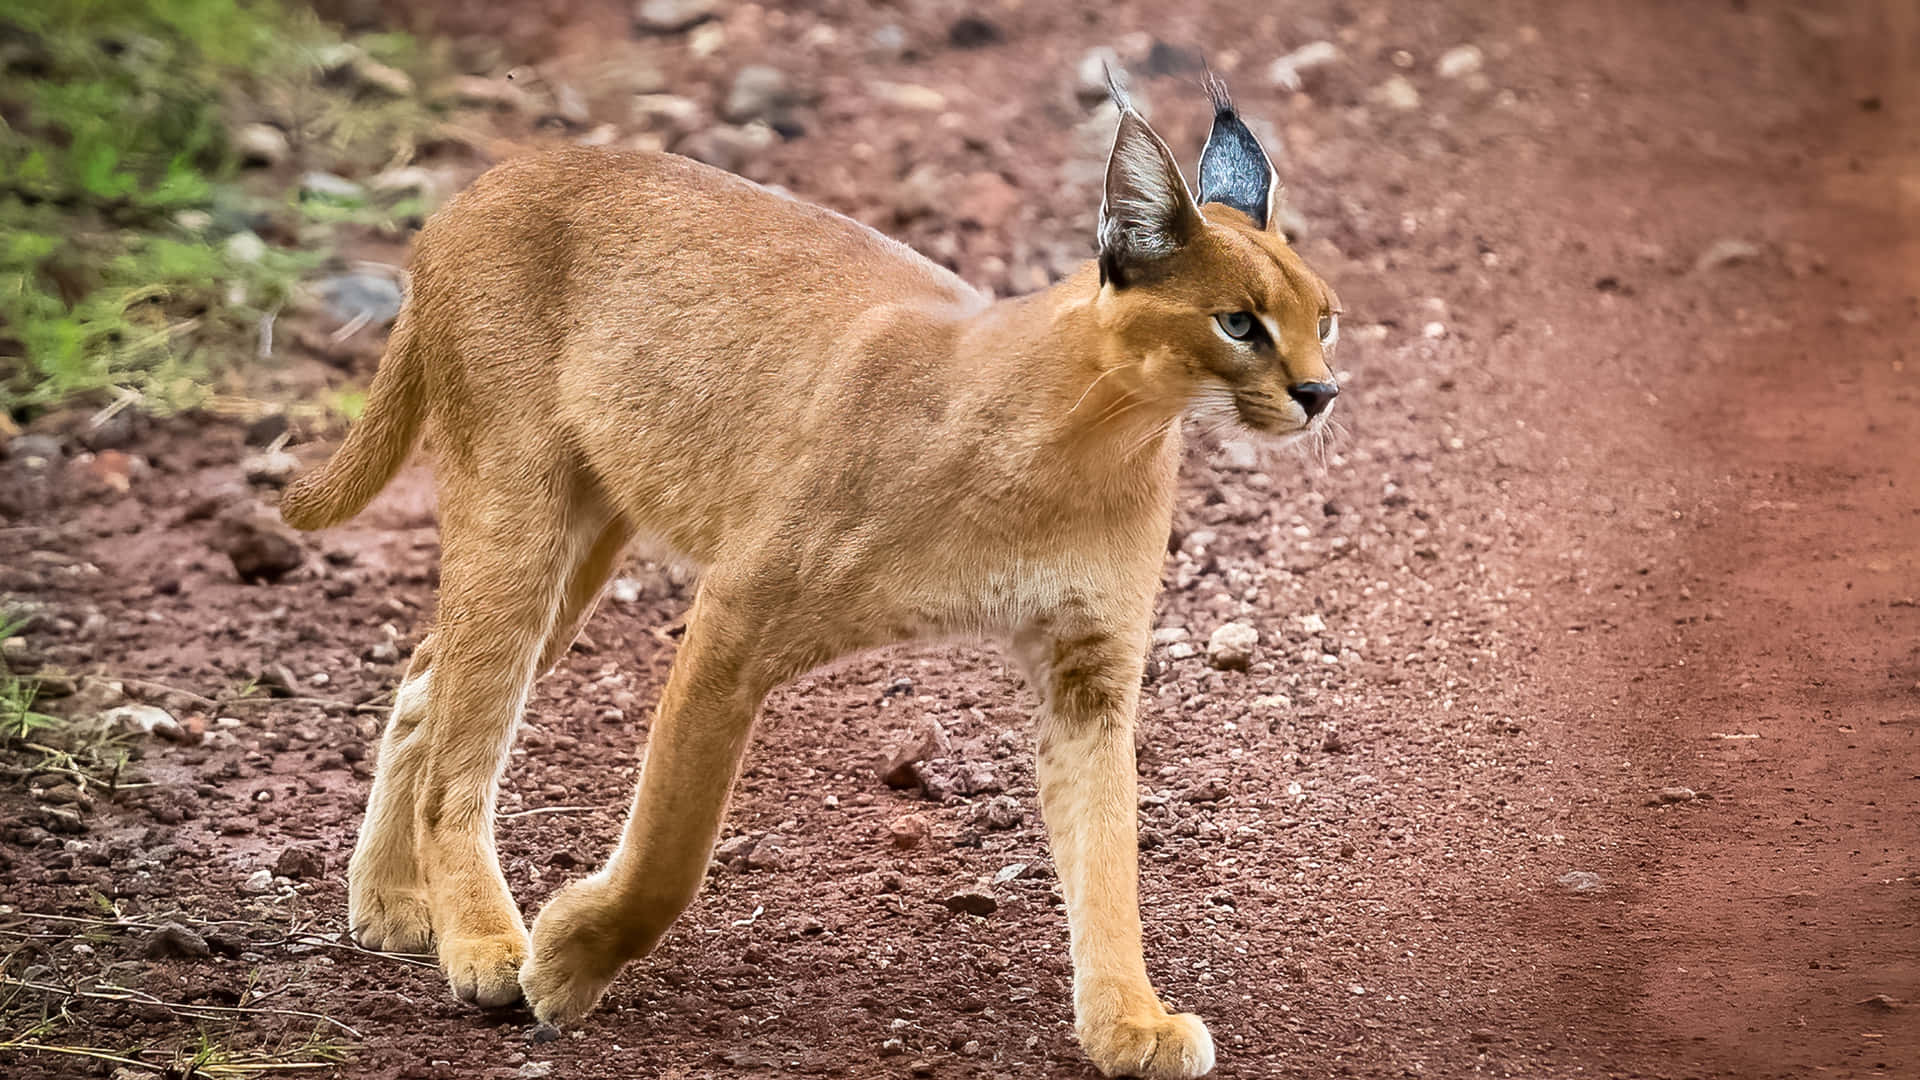 Majestic Caracal In A Natural Landscape Wallpaper